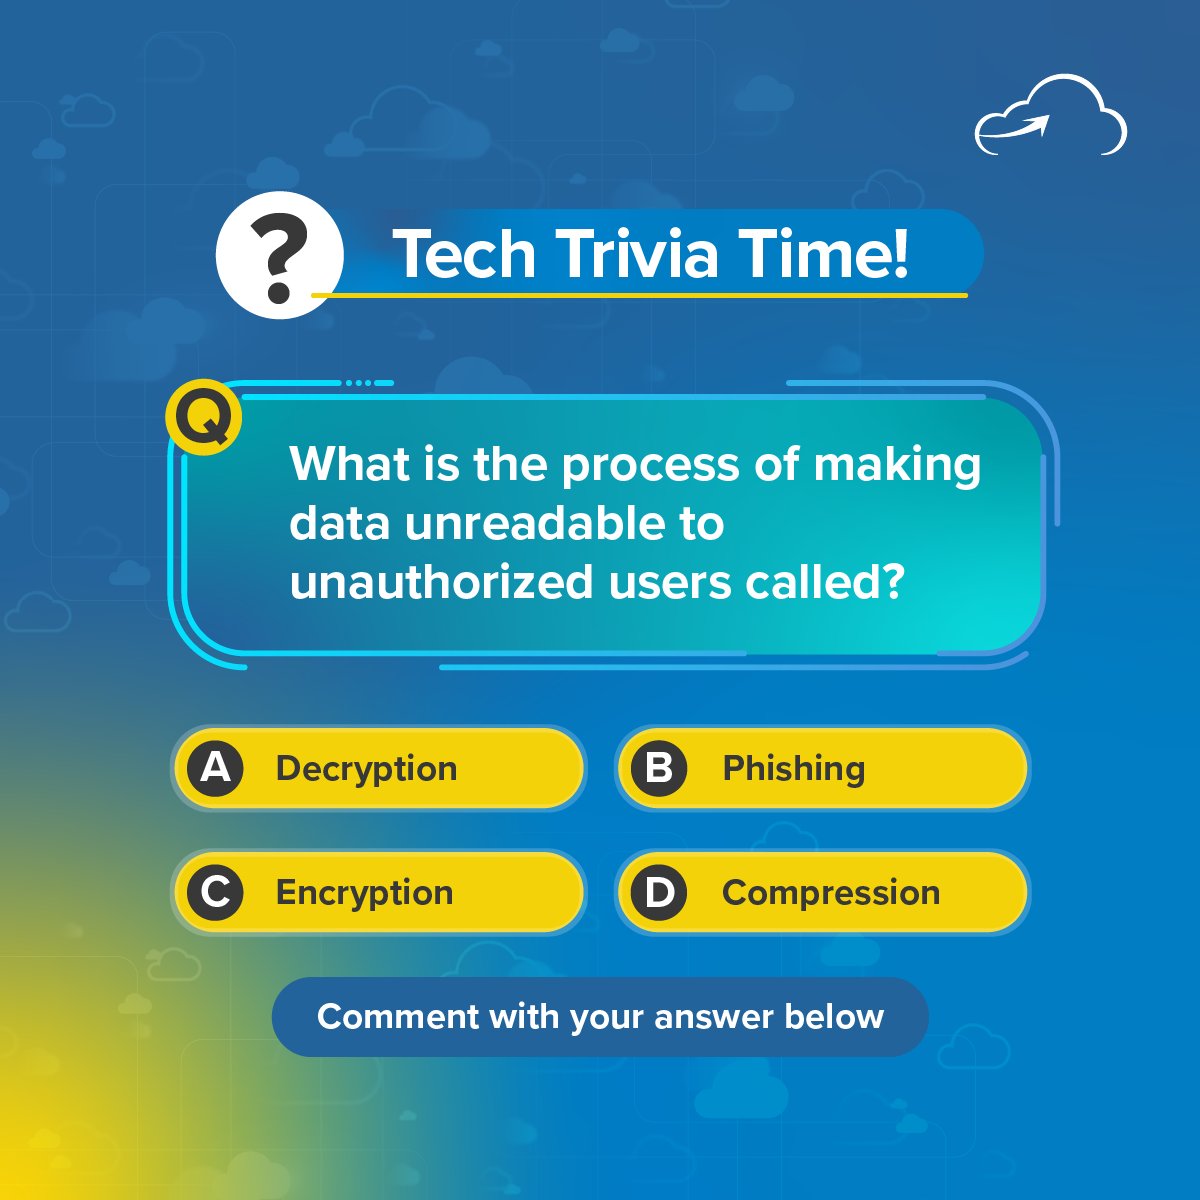 Can you crack the tech puzzle? Put your tech knowledge to the test! Comment below with your answer and show off your expertise in security.

#TechTrivia #GuessTheAnswer #DataSecurityChallenge #TechEnthusiasts #TechCommunity #TechQuiz #Technology #Cybersecurity #TechGurus